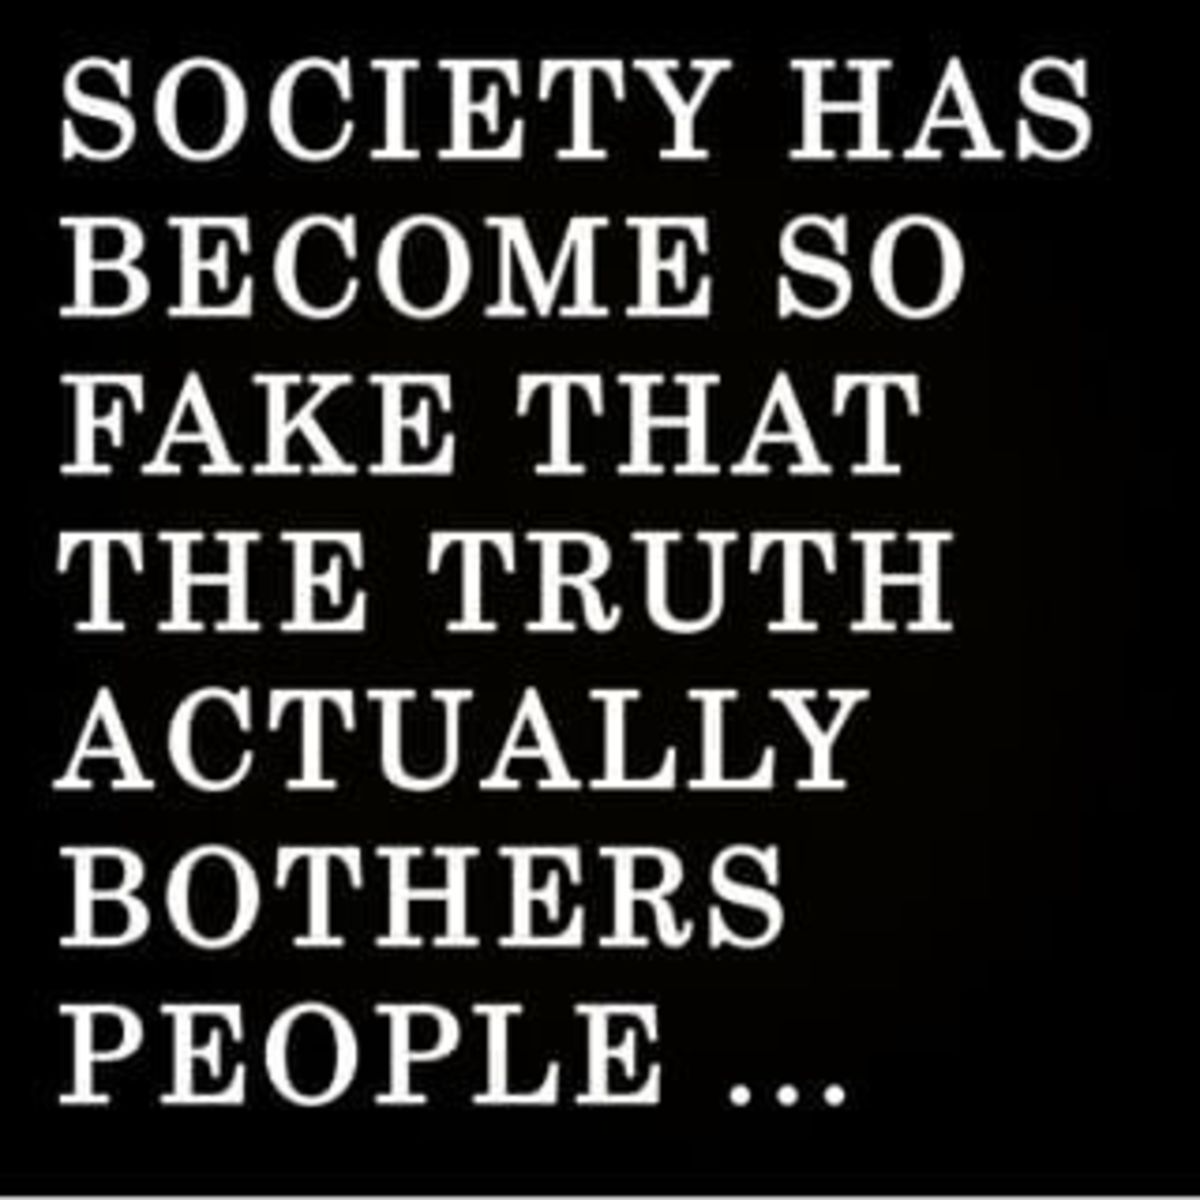 The Truth Has Been Polluted For So Long, The People Don't Know The Difference.